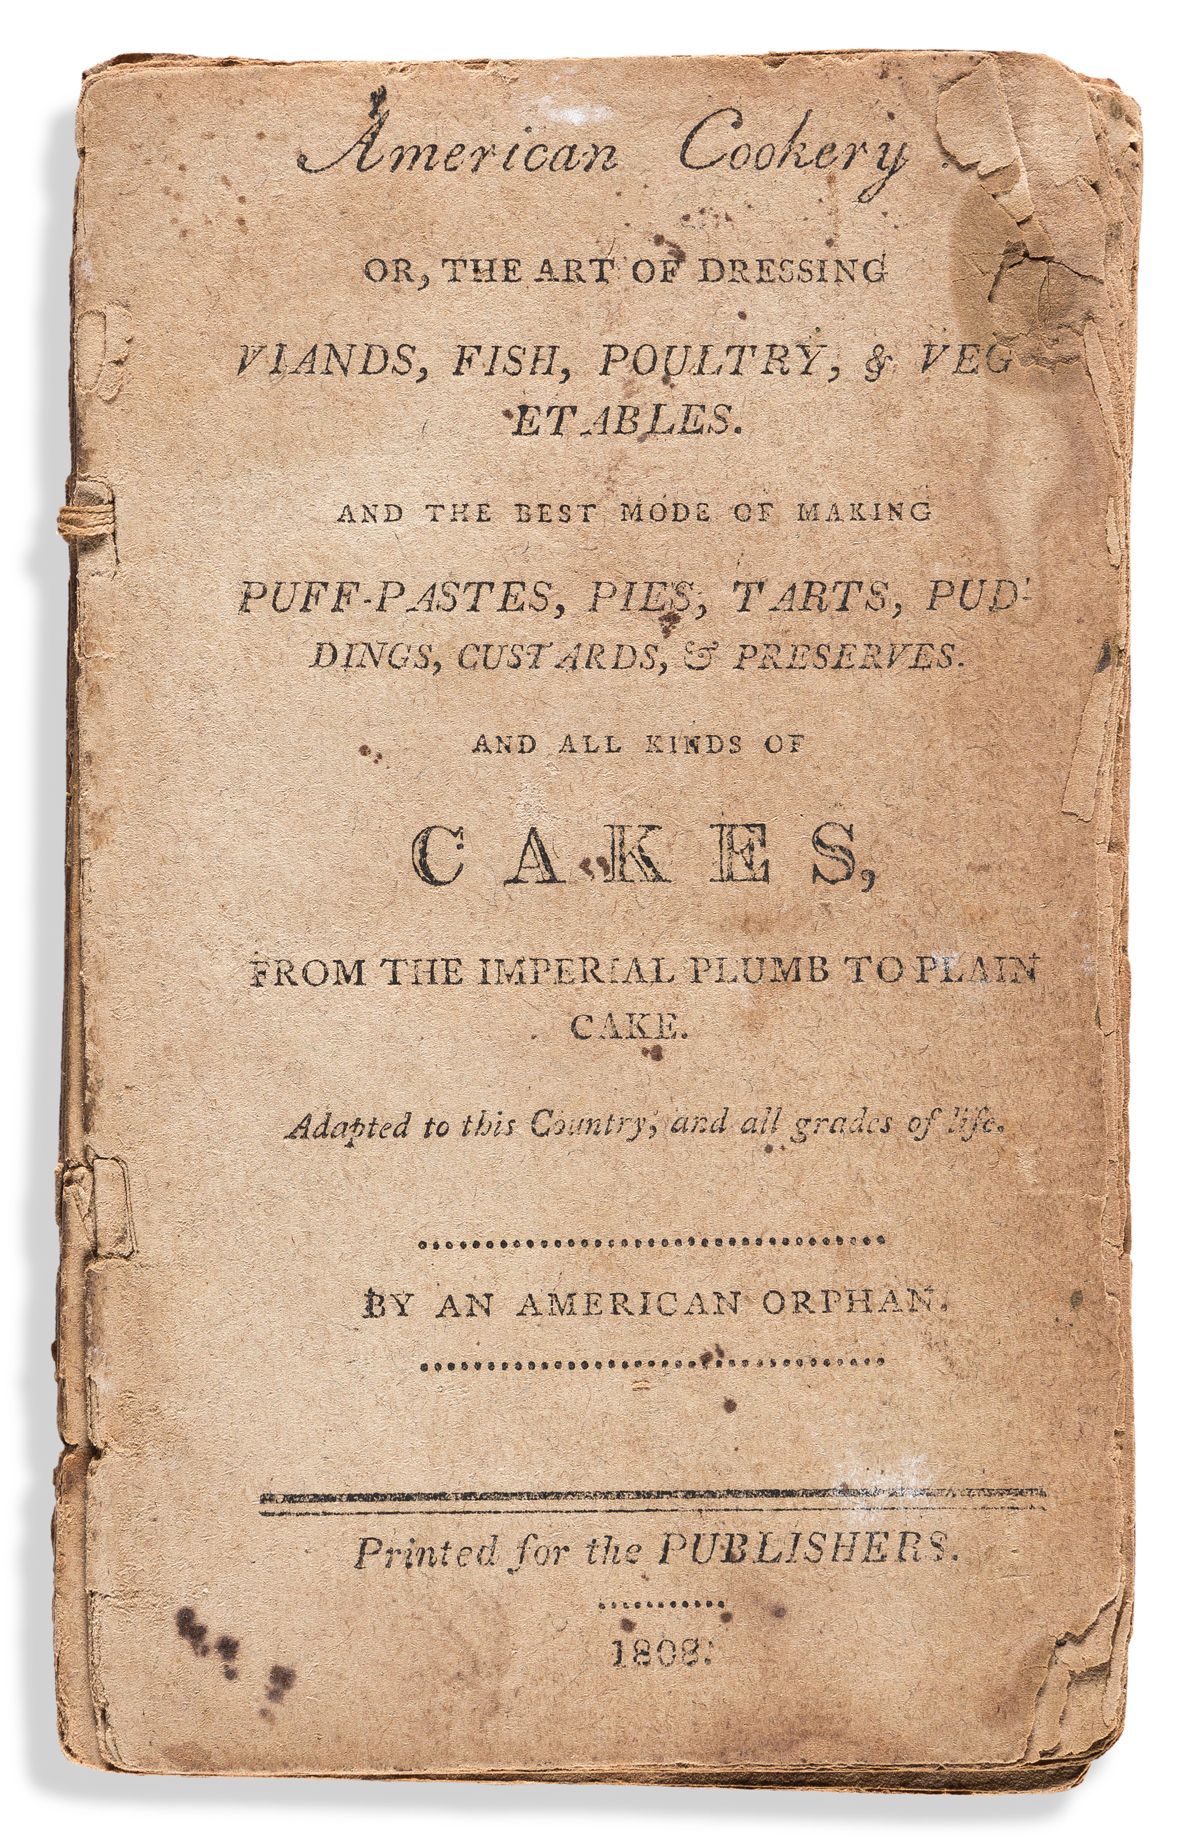 (FOOD & DRINK.) [Amelia Simmons.], American Cookery, or, The Art of Dressing Viands, Fish, Poultry, and Vegetables . . .